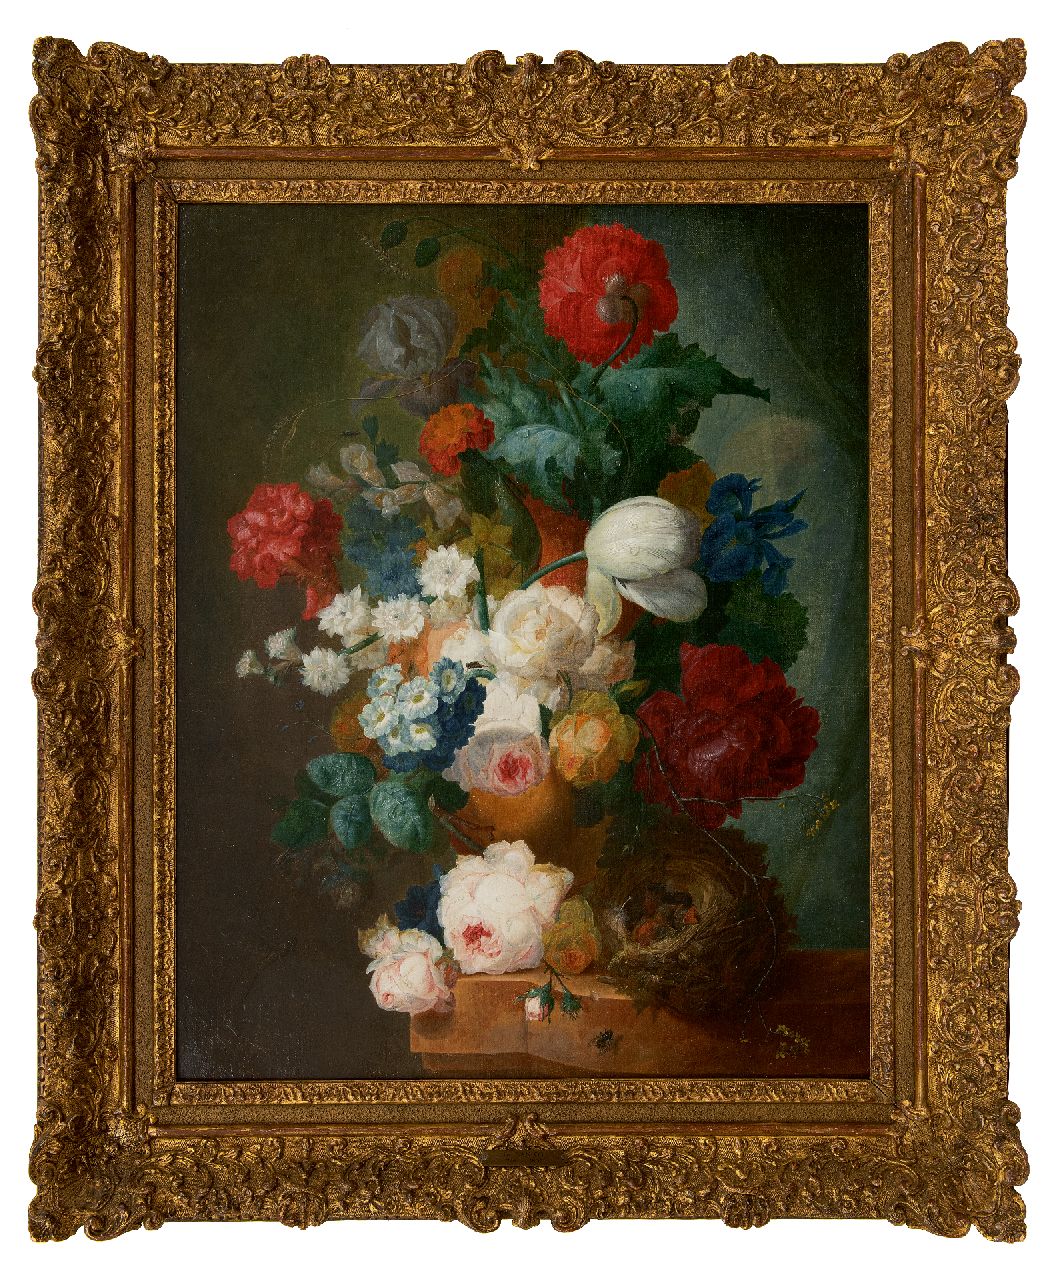 Os J. van | Jan van Os | Paintings offered for sale | Still life with roses, poppies and bird's nest, oil on canvas 66.3 x 55.0 cm, signed l.l. (bears feaded  signature) and circa 1765